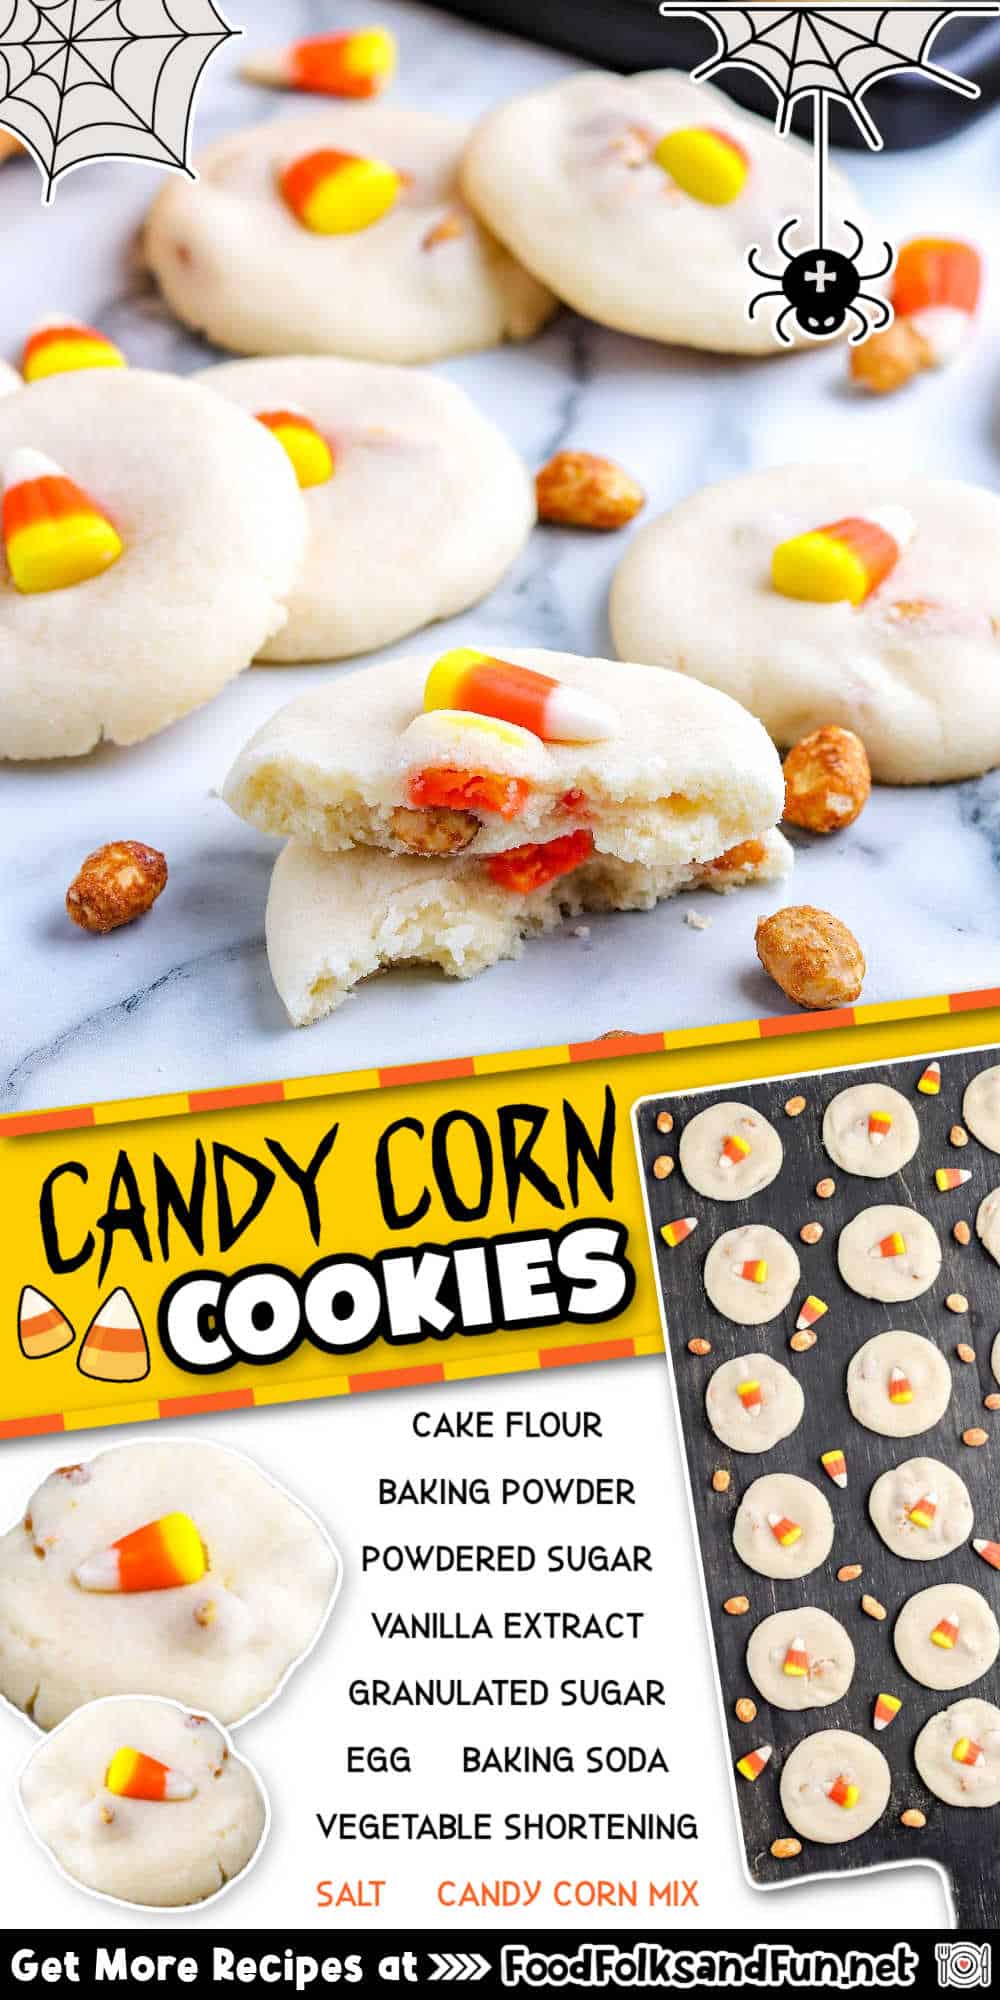 These sweet and salty candy corn cookies are the perfect fall treat for when you want something besides pumpkin or apple flavors! They’re easy to make in bulk and great for parties and potlucks. 

This recipe makes 48 servings and costs about $10.49 to make. That’s just $0.22 per serving.  
People tend to have a love/hate relationship with candy corn. You may not love it plain, but add a salty ingredient to the mix, and it becomes over-the-top delicious, like in my Candy Corn and Peanuts. These Candy Corn Cookies are no different. They are perfectly sweet, salty, chewy, and slightly crispy around the edges.
 
Don’t reserve these cookies just for autumn, though. You can quickly adapt the base sugar cookie recipe to make this cookie work year-round. I’ve included fifteen variations on the recipe for you to enjoy on any occasion!
 via @foodfolksandfun